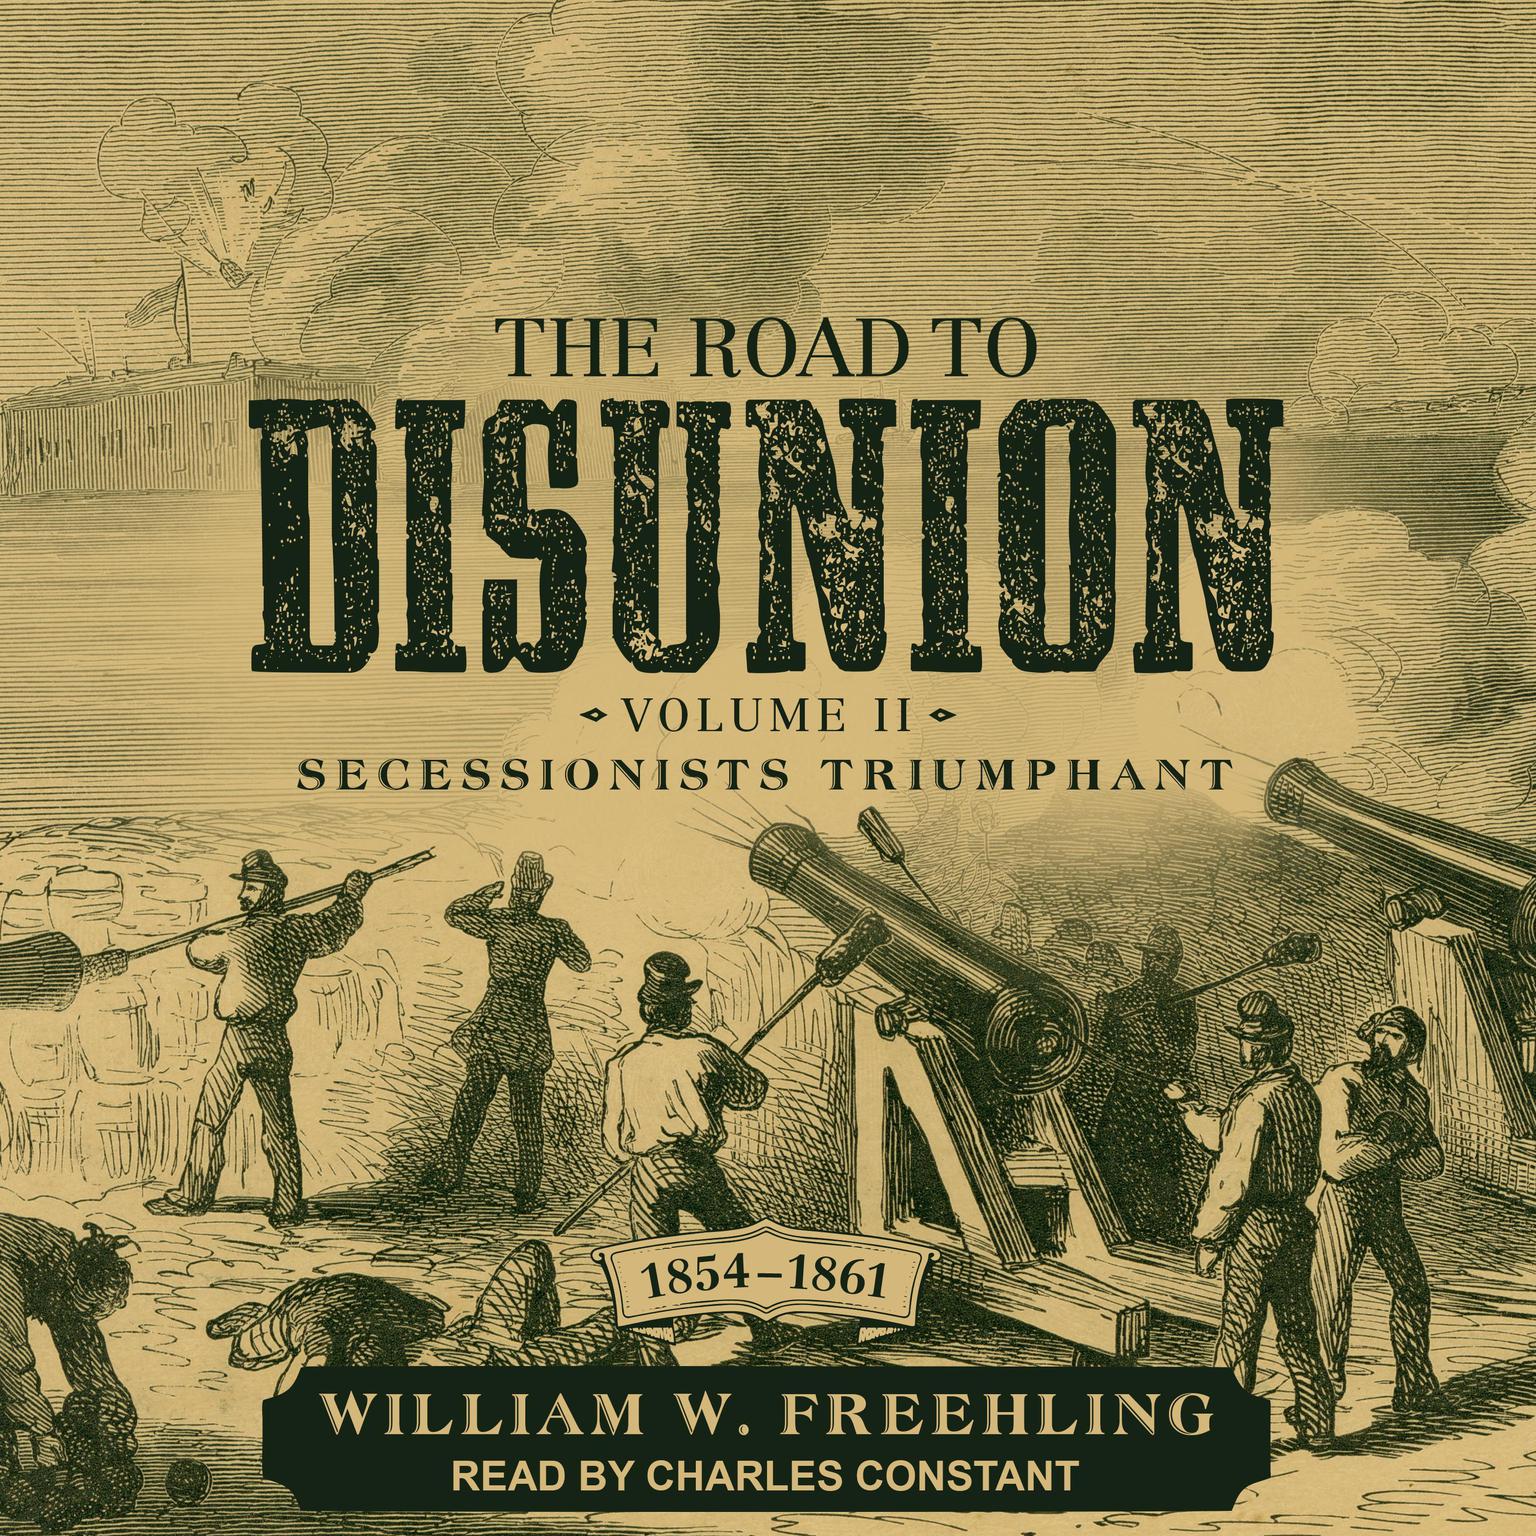 The Road to Disunion: Volume II: Secessionists Triumphant, 1854-1861 Audiobook, by William W. Freehling